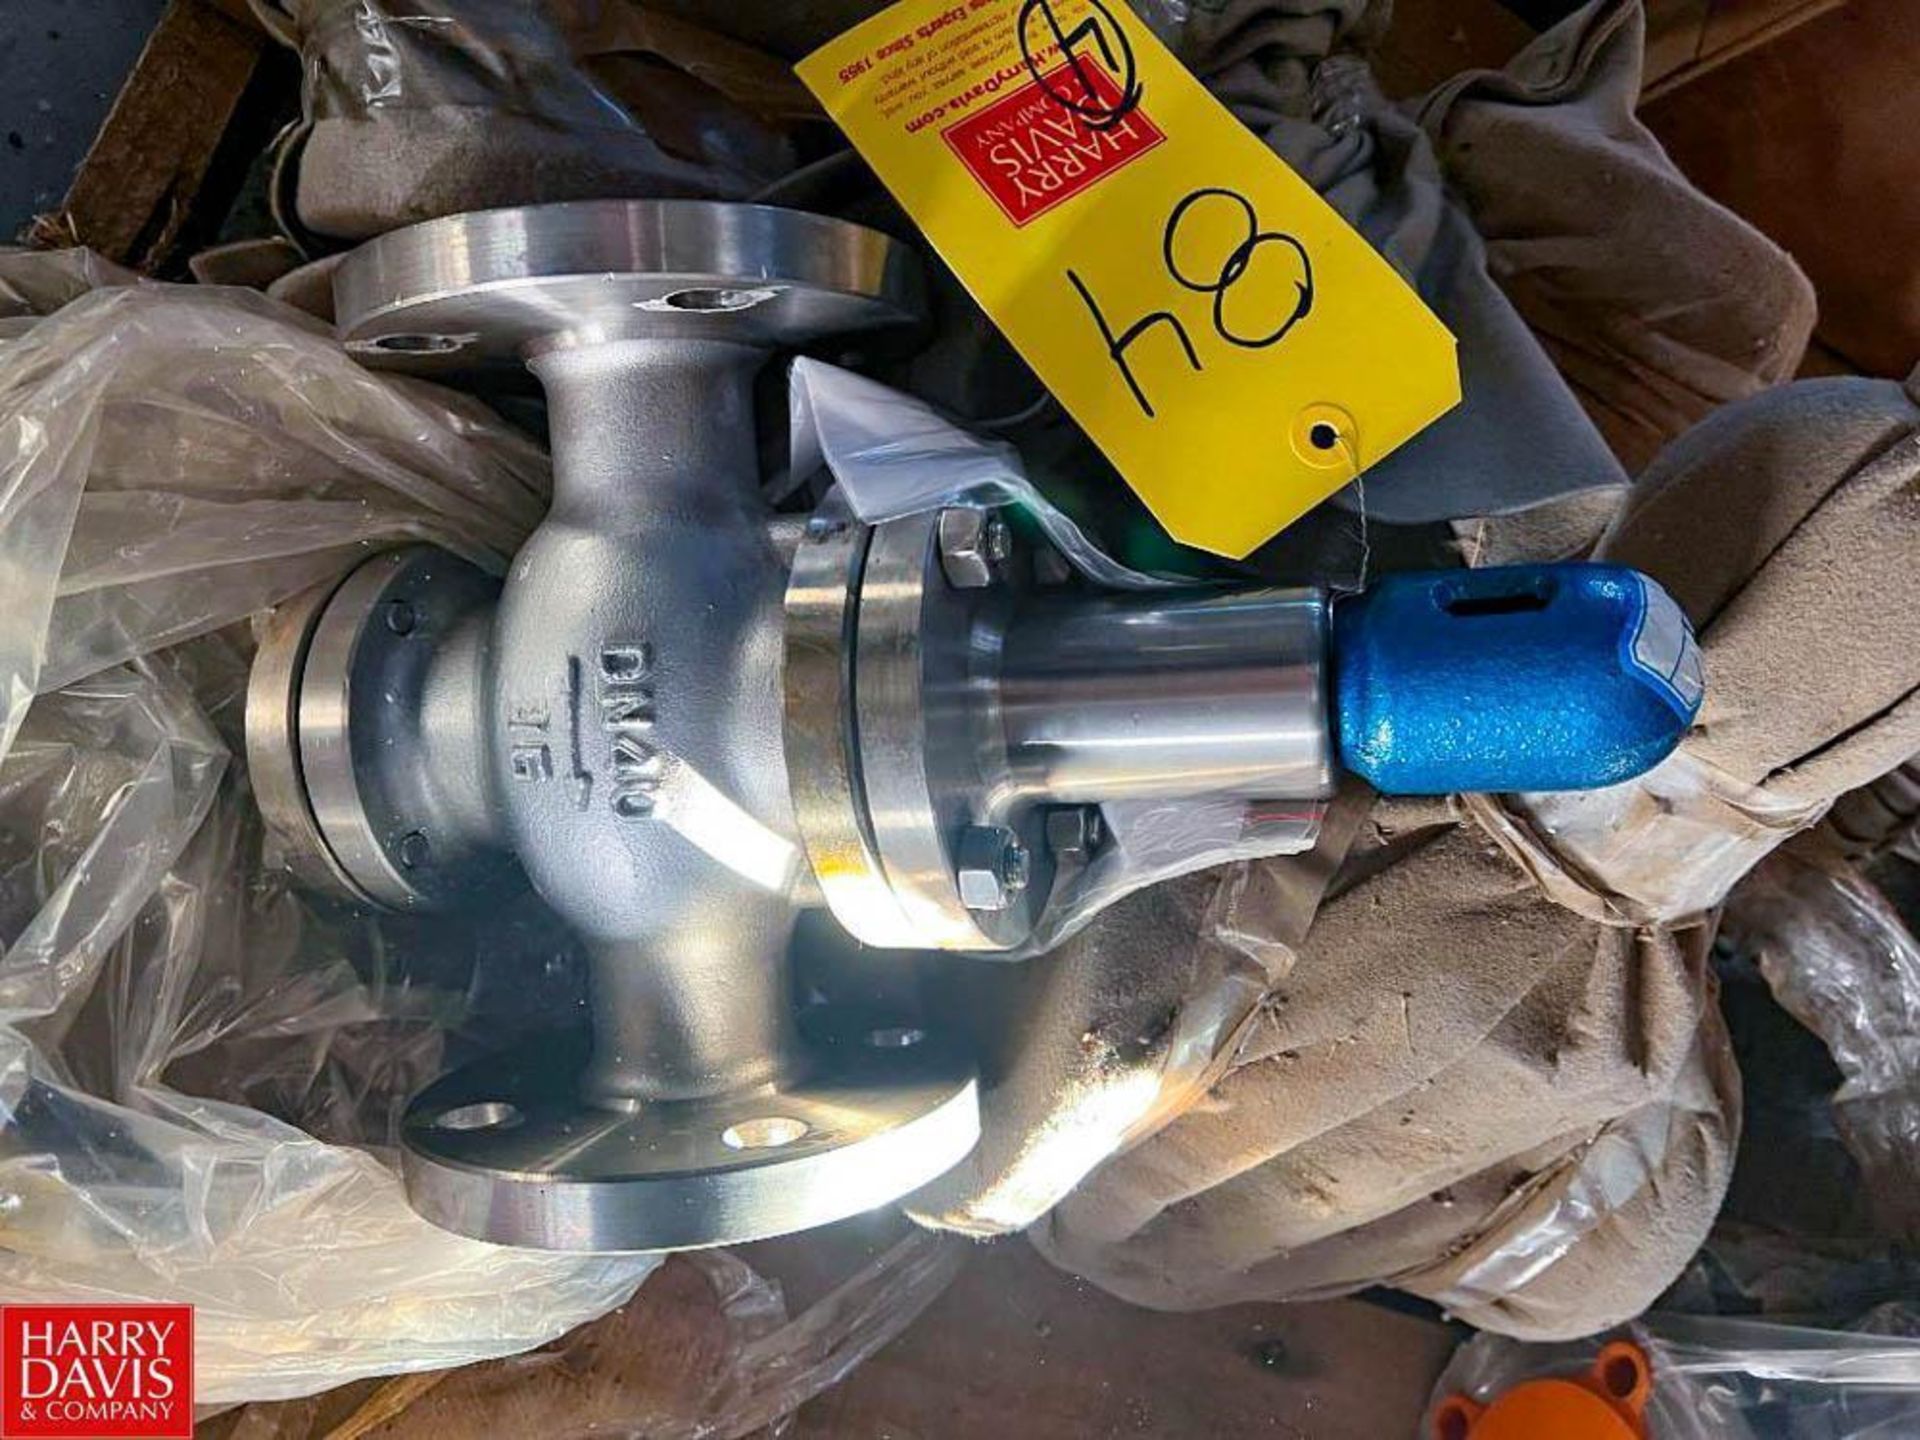 NEW 2.25" S/S Slow Release Valves - Rigging Fee: $25